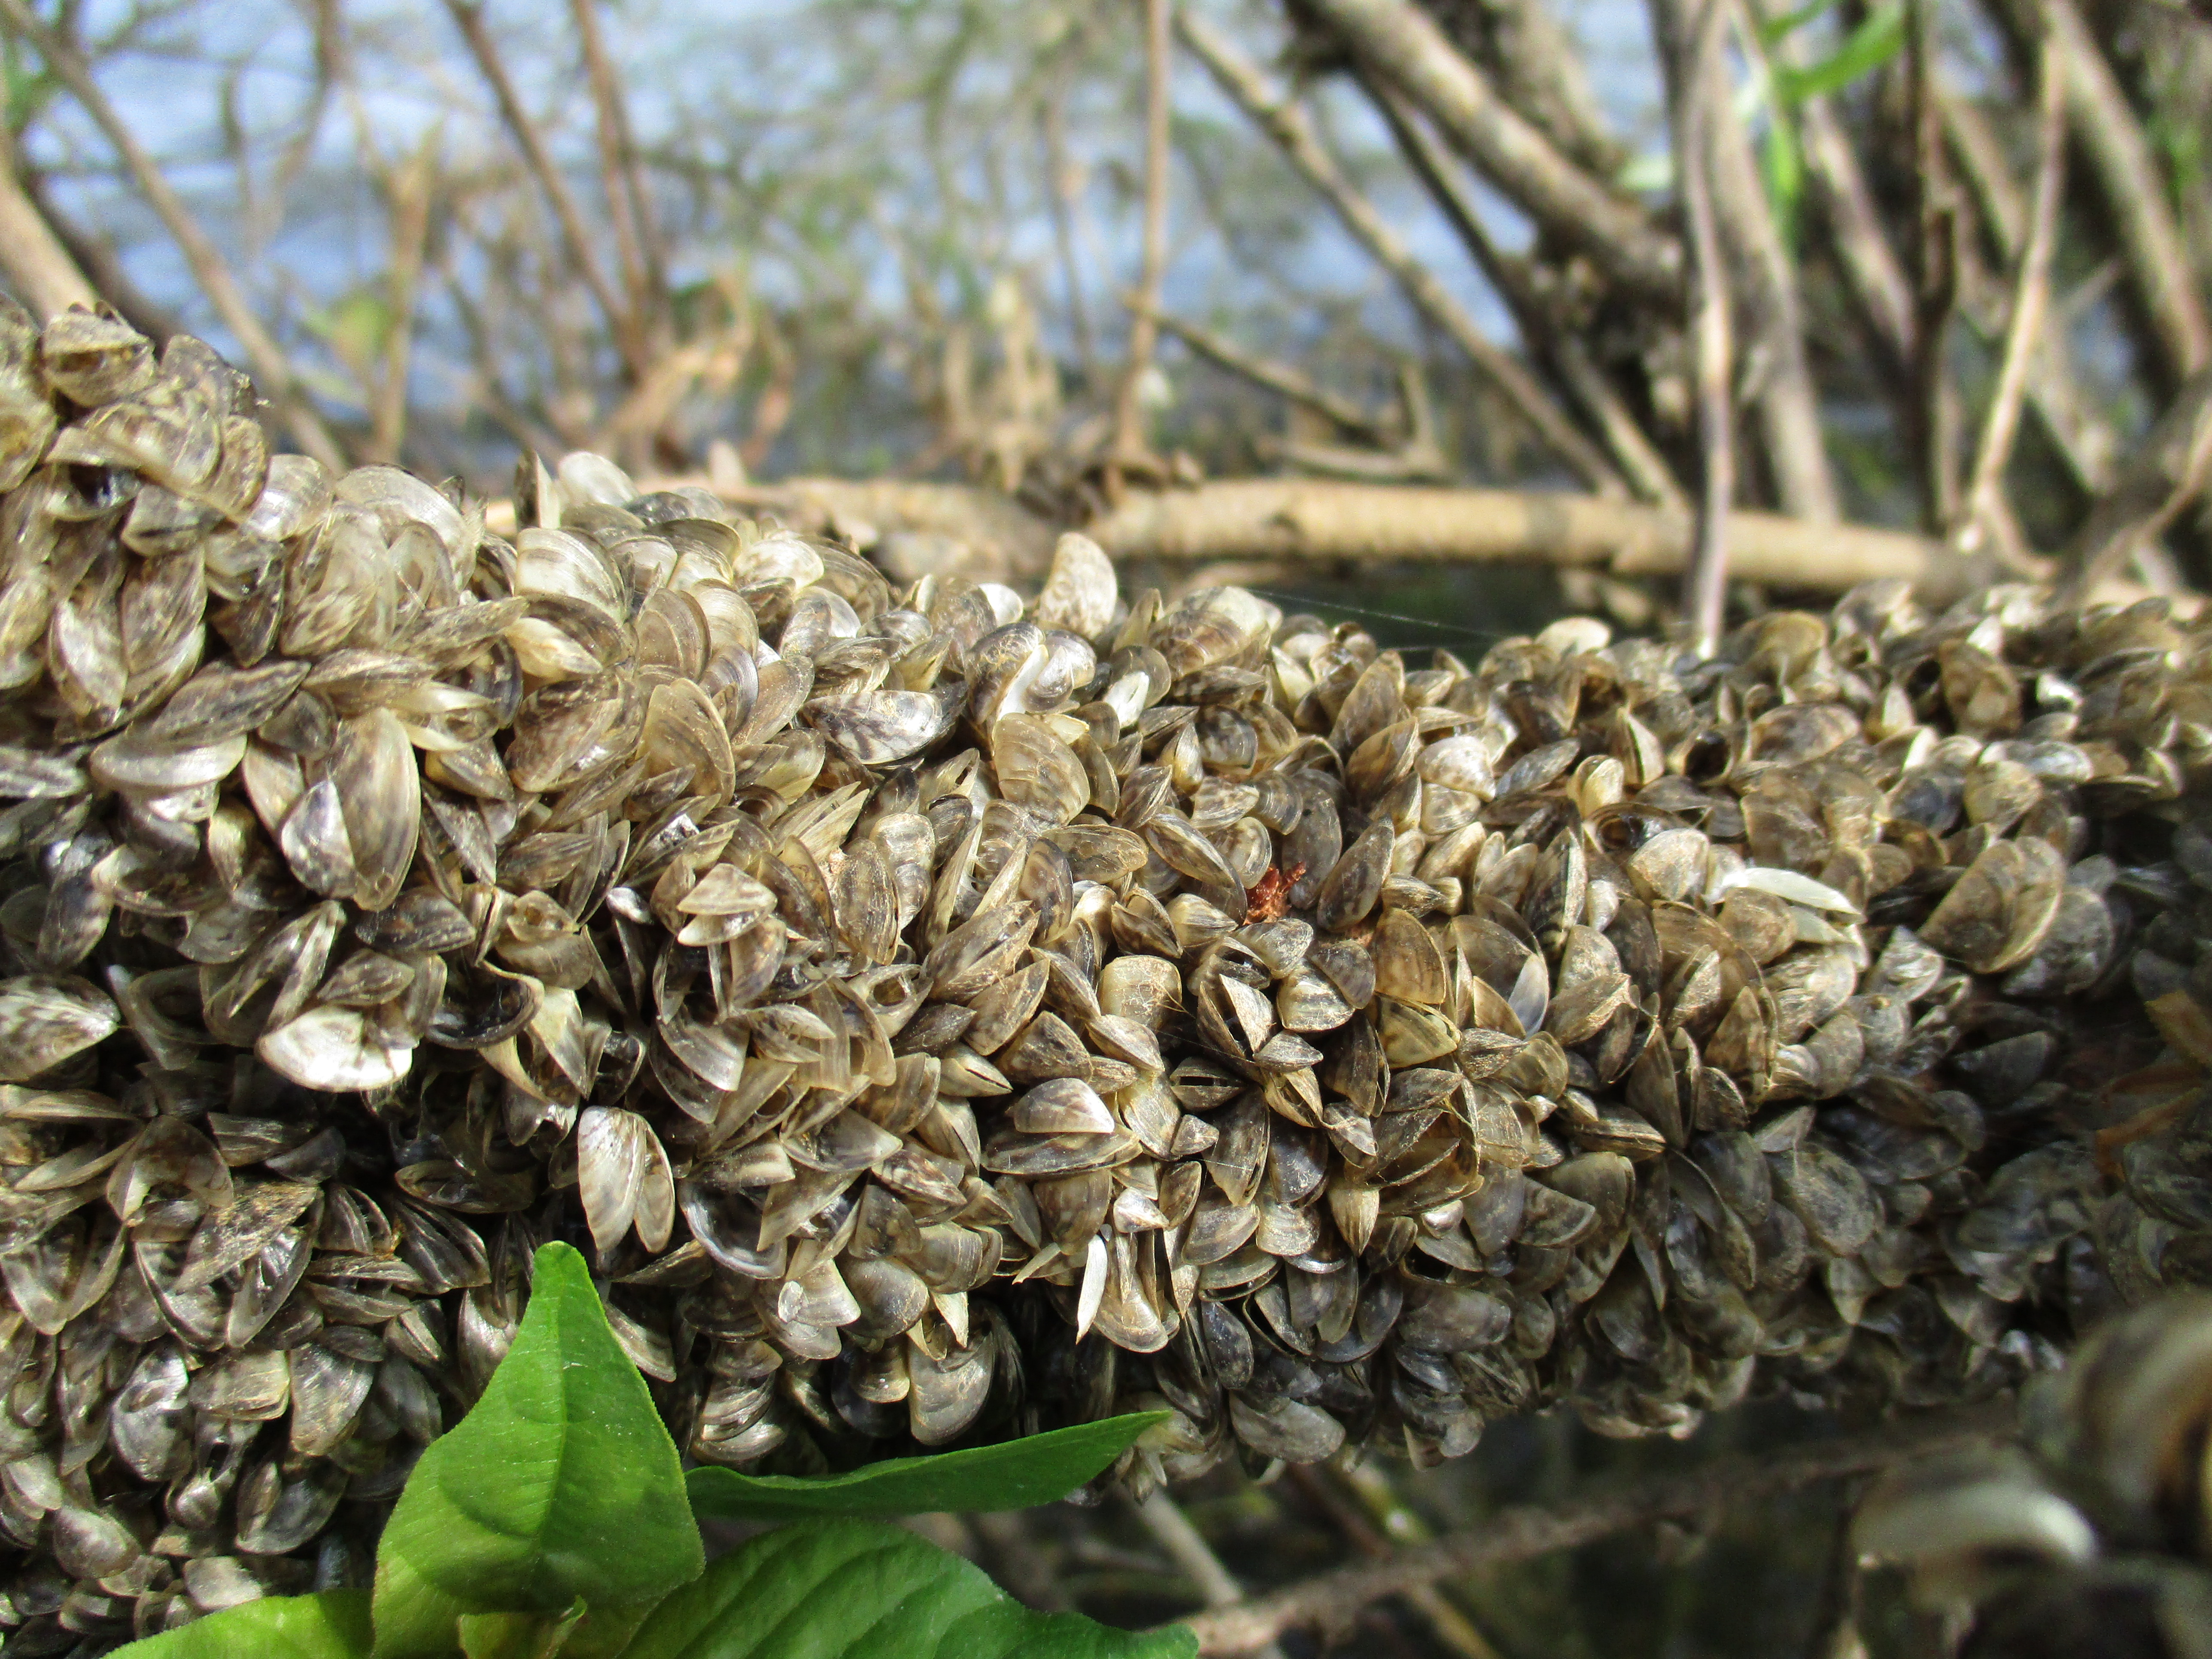 Lower half of the photo dominated by a close up a tree limb covered with zebra mussels